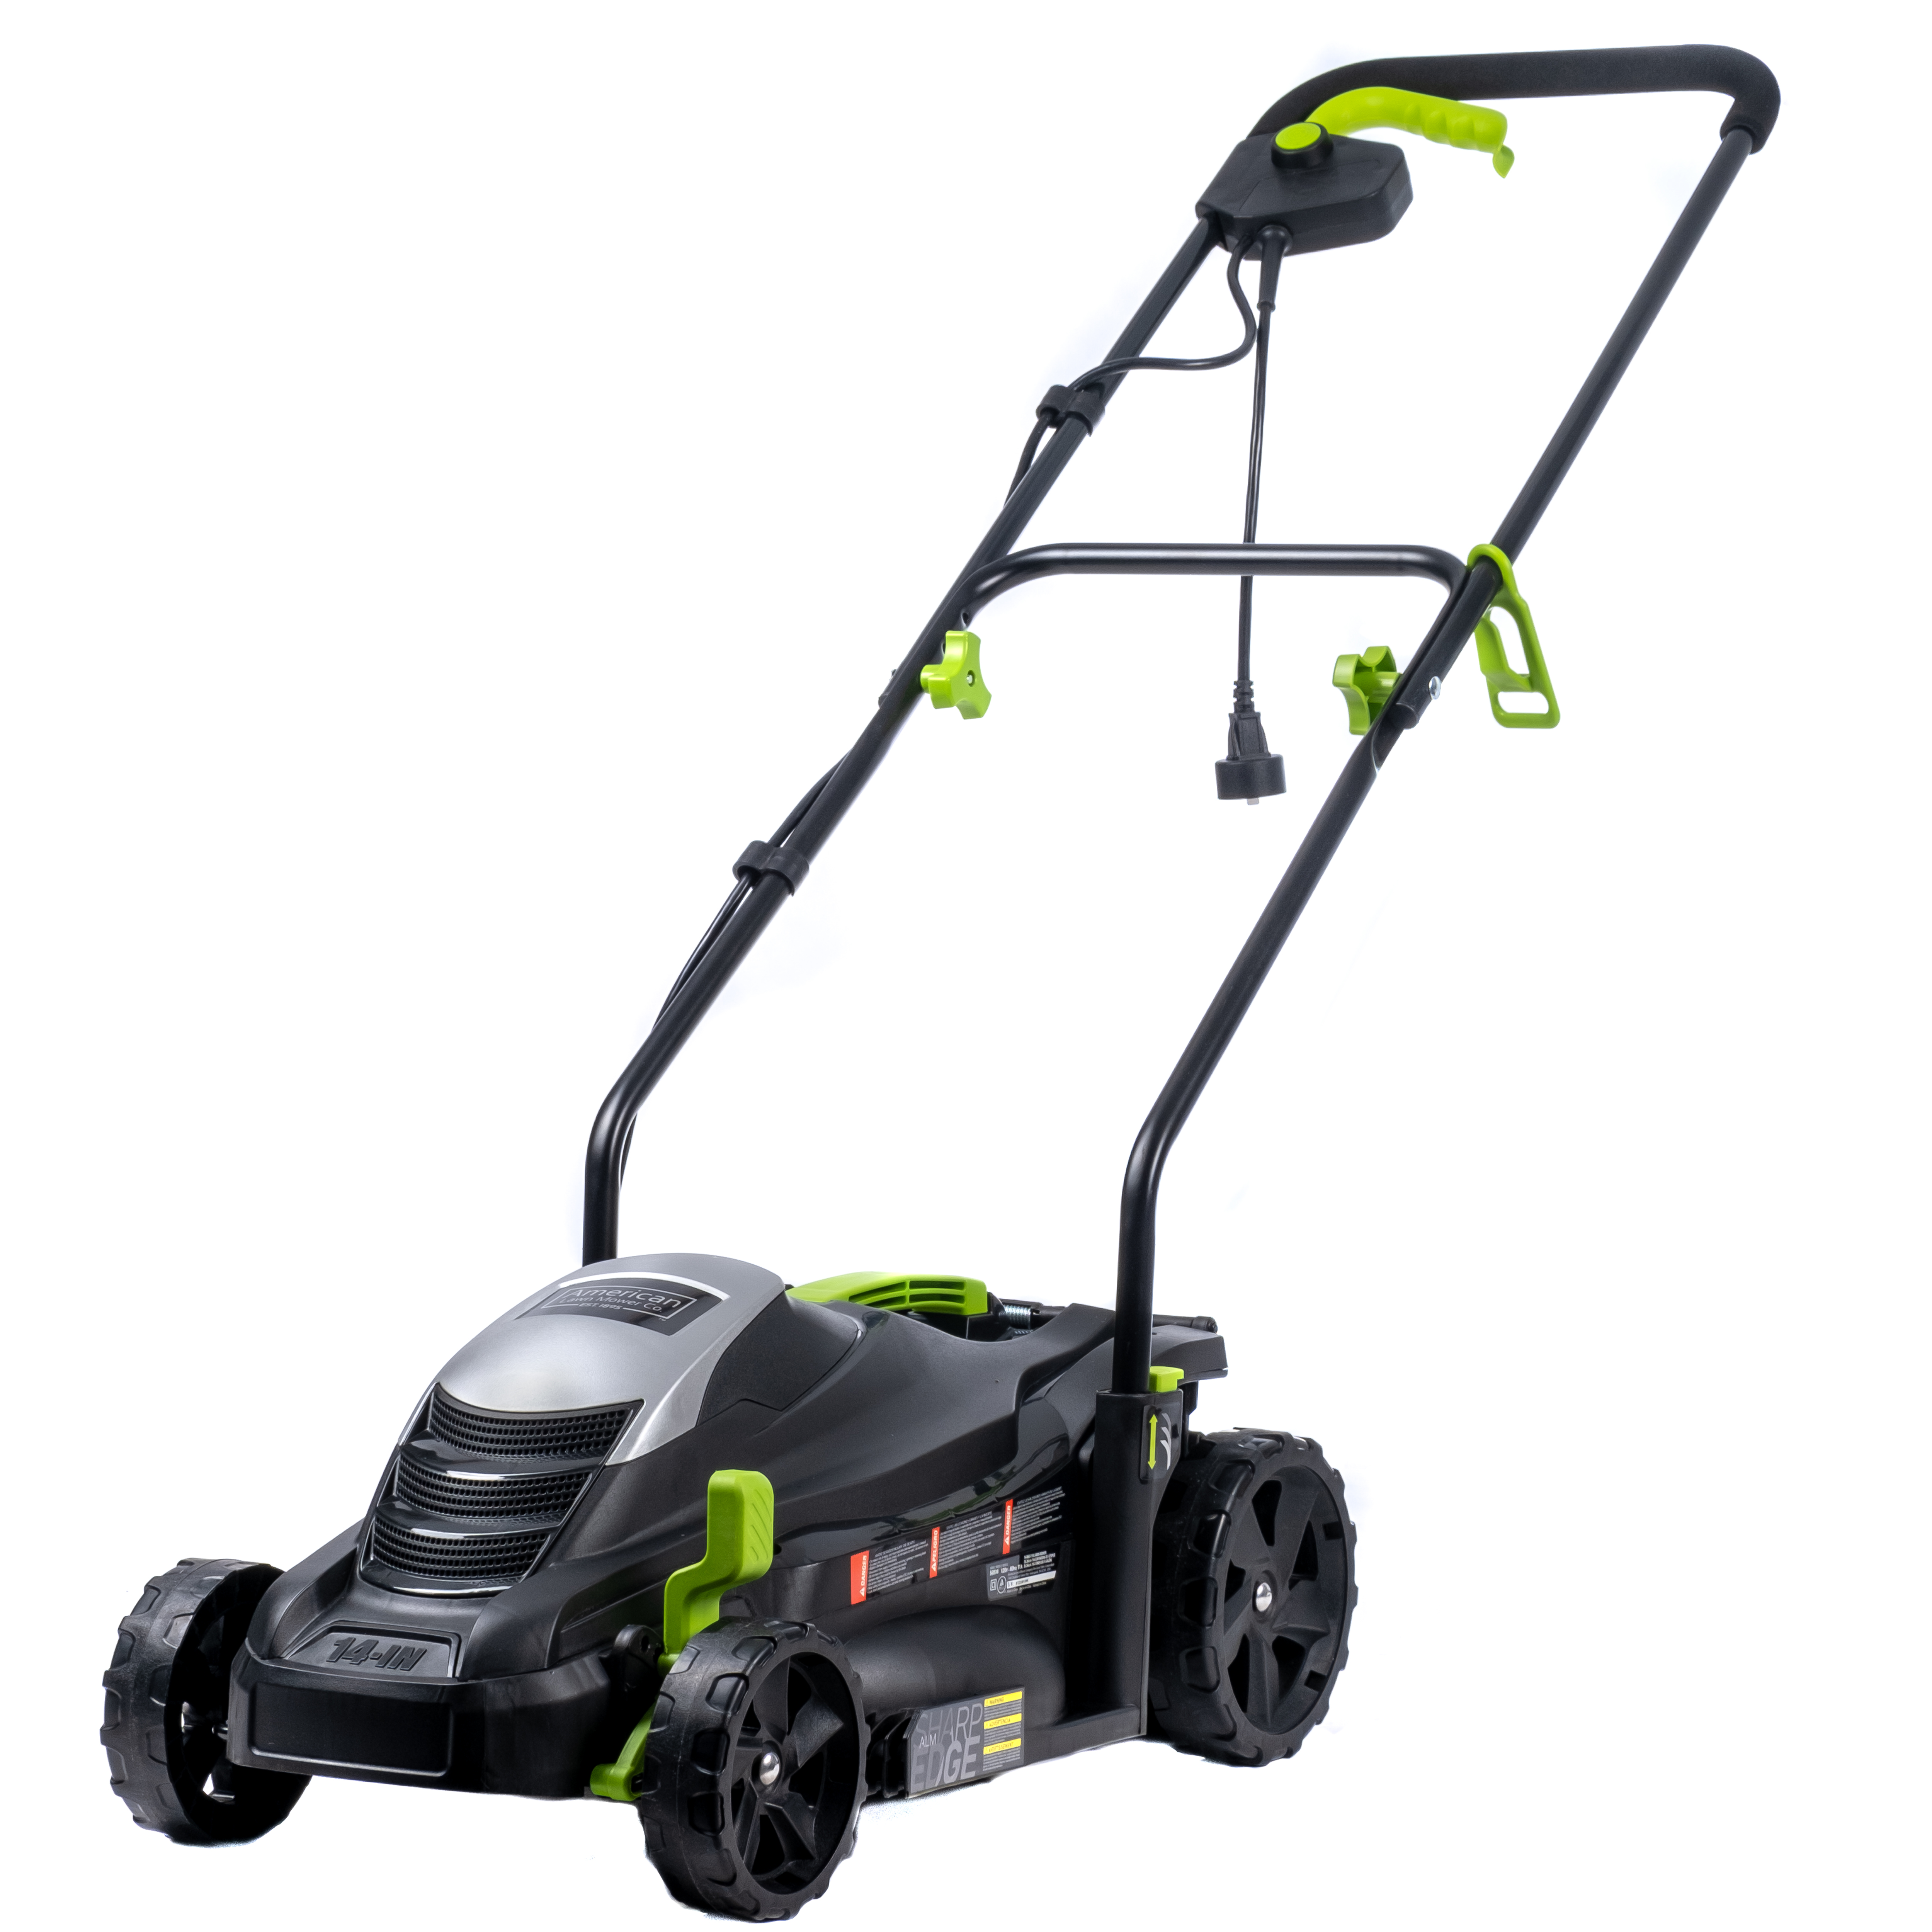 American Lawn Mower 50514 14" Corded Electric Lawn Mower - image 2 of 4